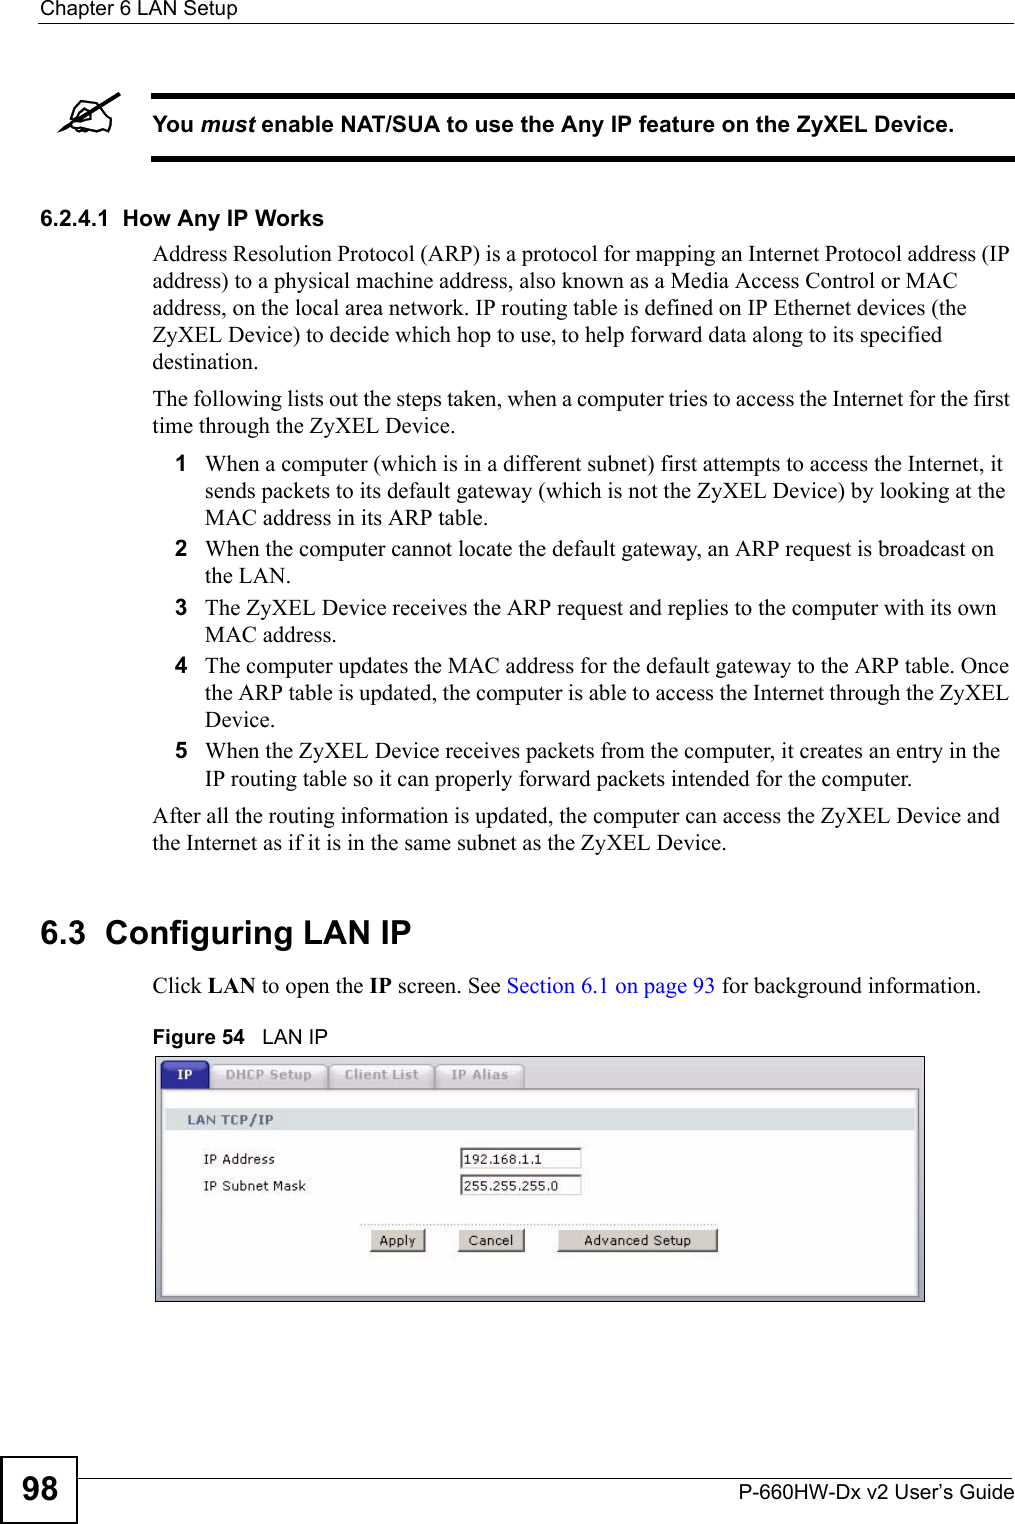 Chapter 6 LAN SetupP-660HW-Dx v2 User’s Guide98&quot;You must enable NAT/SUA to use the Any IP feature on the ZyXEL Device. 6.2.4.1  How Any IP WorksAddress Resolution Protocol (ARP) is a protocol for mapping an Internet Protocol address (IP address) to a physical machine address, also known as a Media Access Control or MAC address, on the local area network. IP routing table is defined on IP Ethernet devices (the ZyXEL Device) to decide which hop to use, to help forward data along to its specified destination.The following lists out the steps taken, when a computer tries to access the Internet for the first time through the ZyXEL Device.1When a computer (which is in a different subnet) first attempts to access the Internet, it sends packets to its default gateway (which is not the ZyXEL Device) by looking at the MAC address in its ARP table. 2When the computer cannot locate the default gateway, an ARP request is broadcast on the LAN. 3The ZyXEL Device receives the ARP request and replies to the computer with its own MAC address. 4The computer updates the MAC address for the default gateway to the ARP table. Once the ARP table is updated, the computer is able to access the Internet through the ZyXEL Device. 5When the ZyXEL Device receives packets from the computer, it creates an entry in the IP routing table so it can properly forward packets intended for the computer. After all the routing information is updated, the computer can access the ZyXEL Device and the Internet as if it is in the same subnet as the ZyXEL Device. 6.3  Configuring LAN IPClick LAN to open the IP screen. See Section 6.1 on page 93 for background information. Figure 54   LAN IP